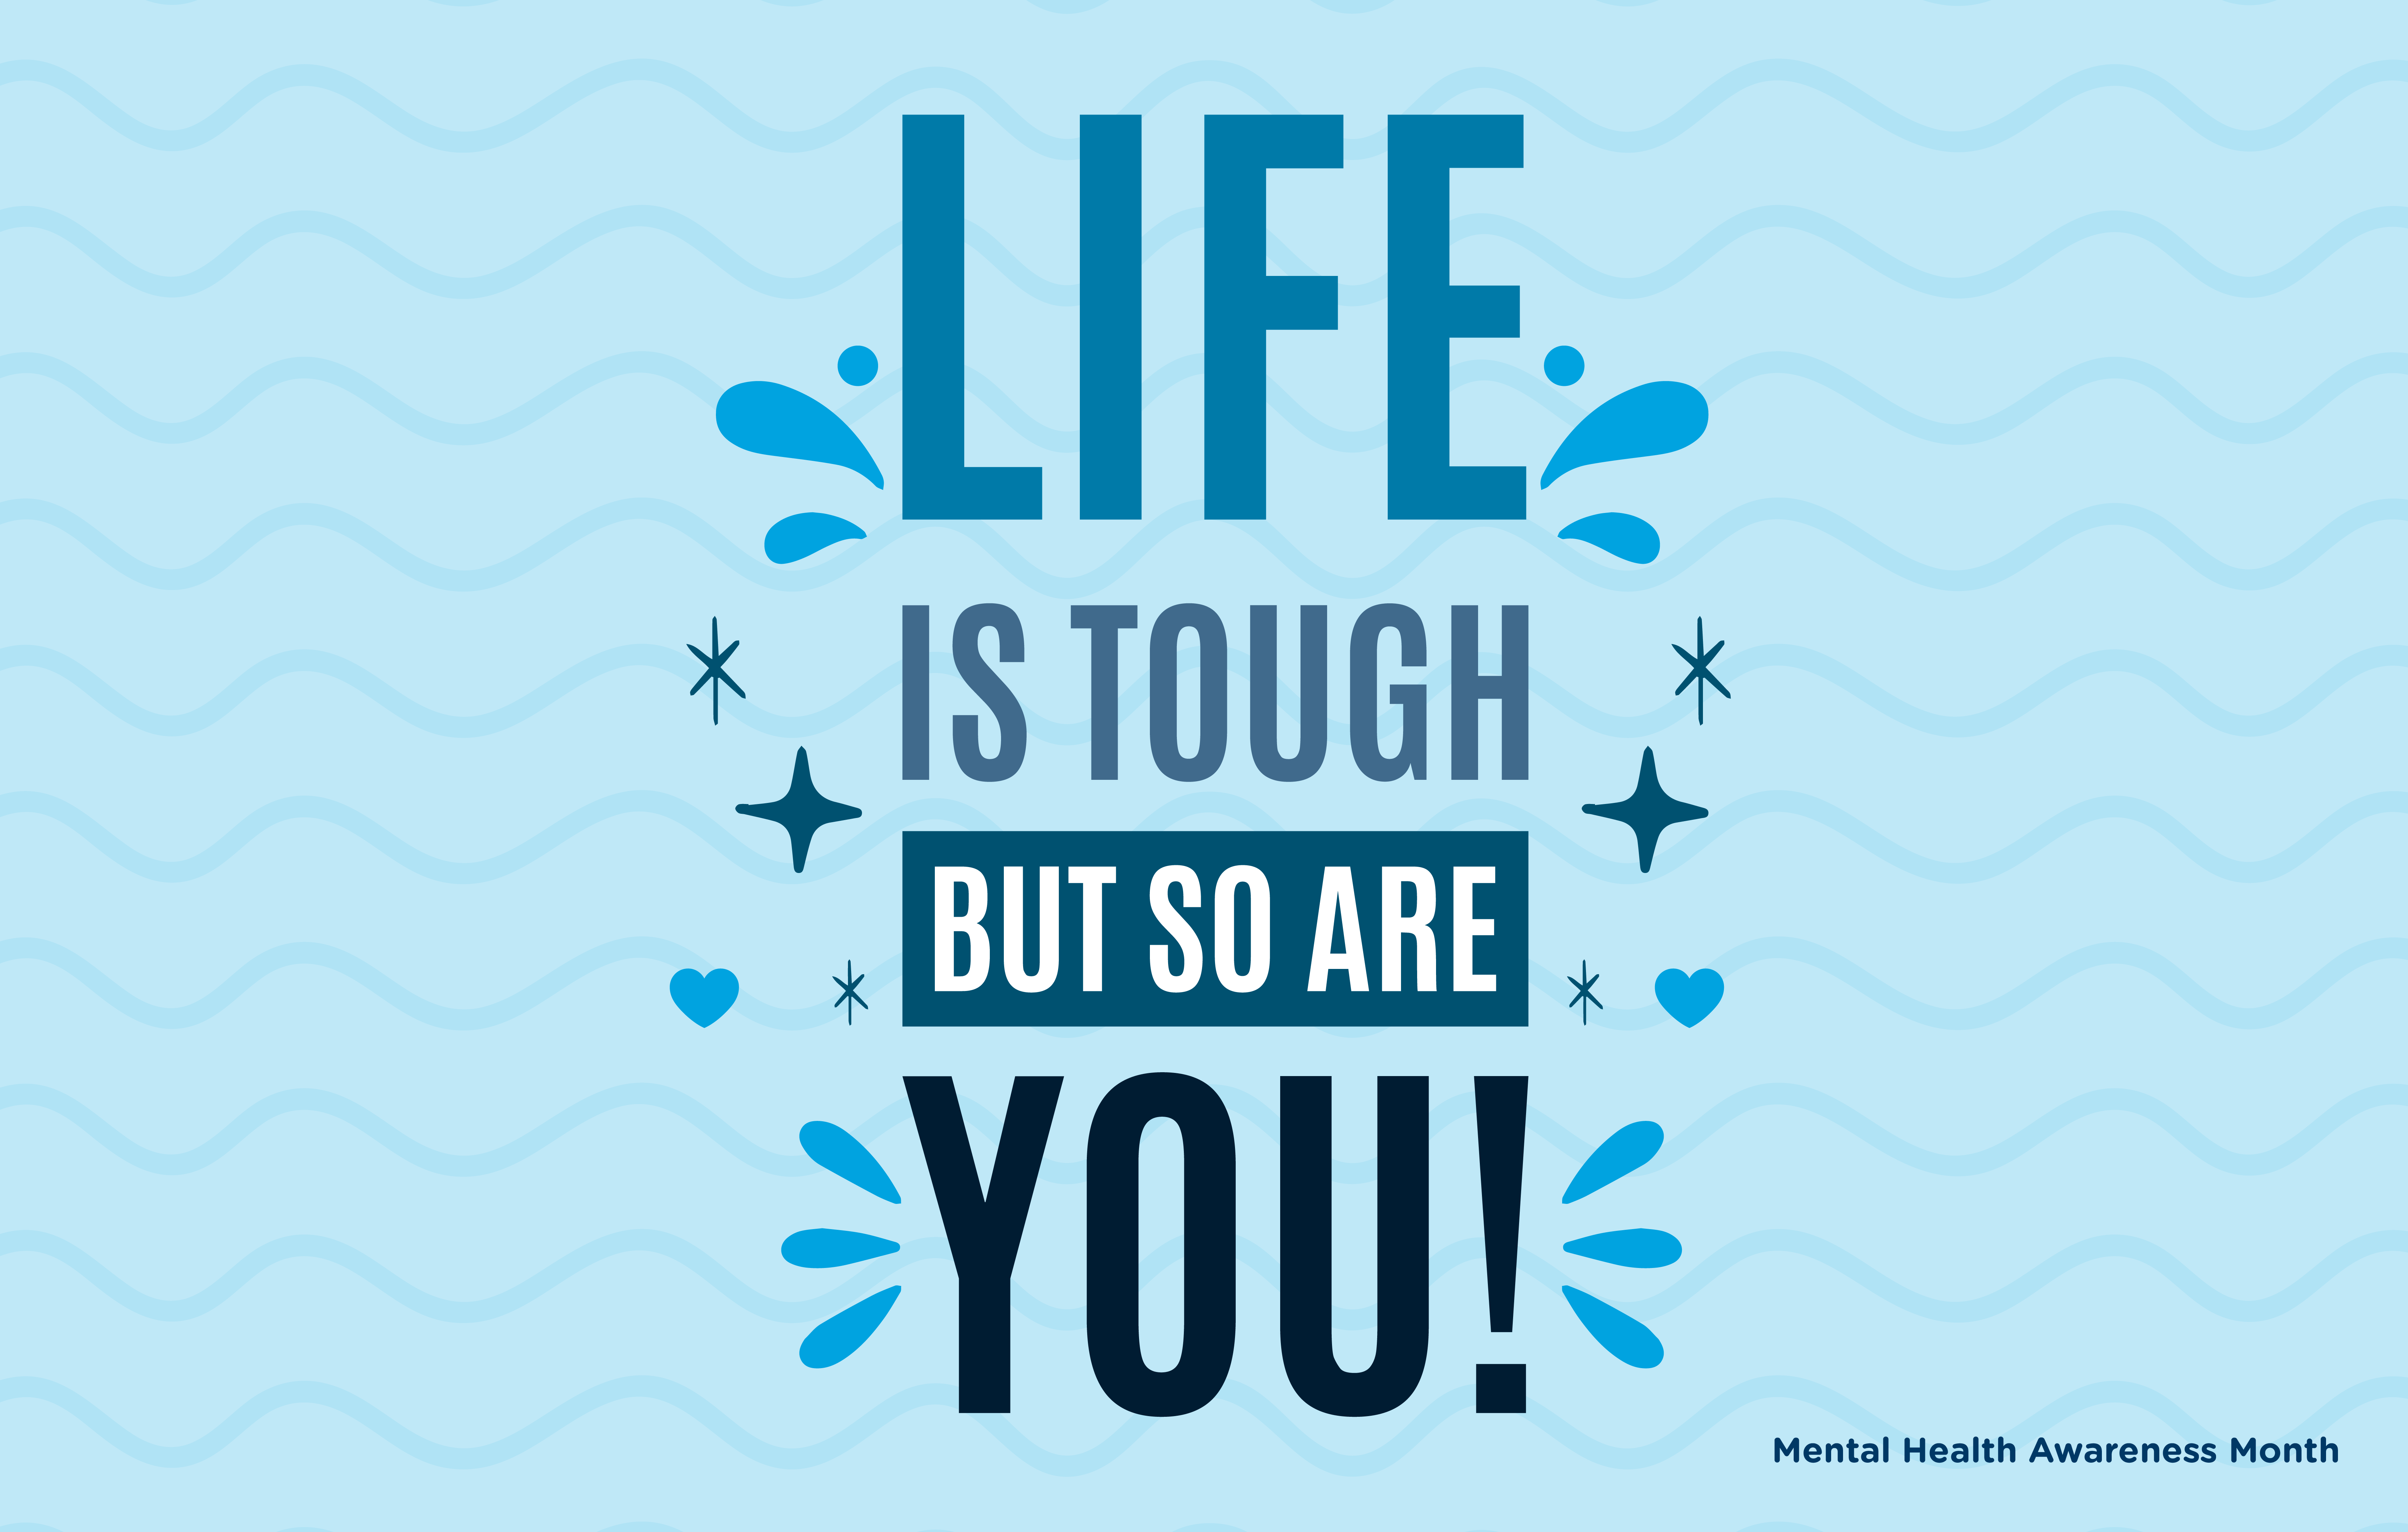 Mental Health Awareness Month: Life is tough, but so are you!